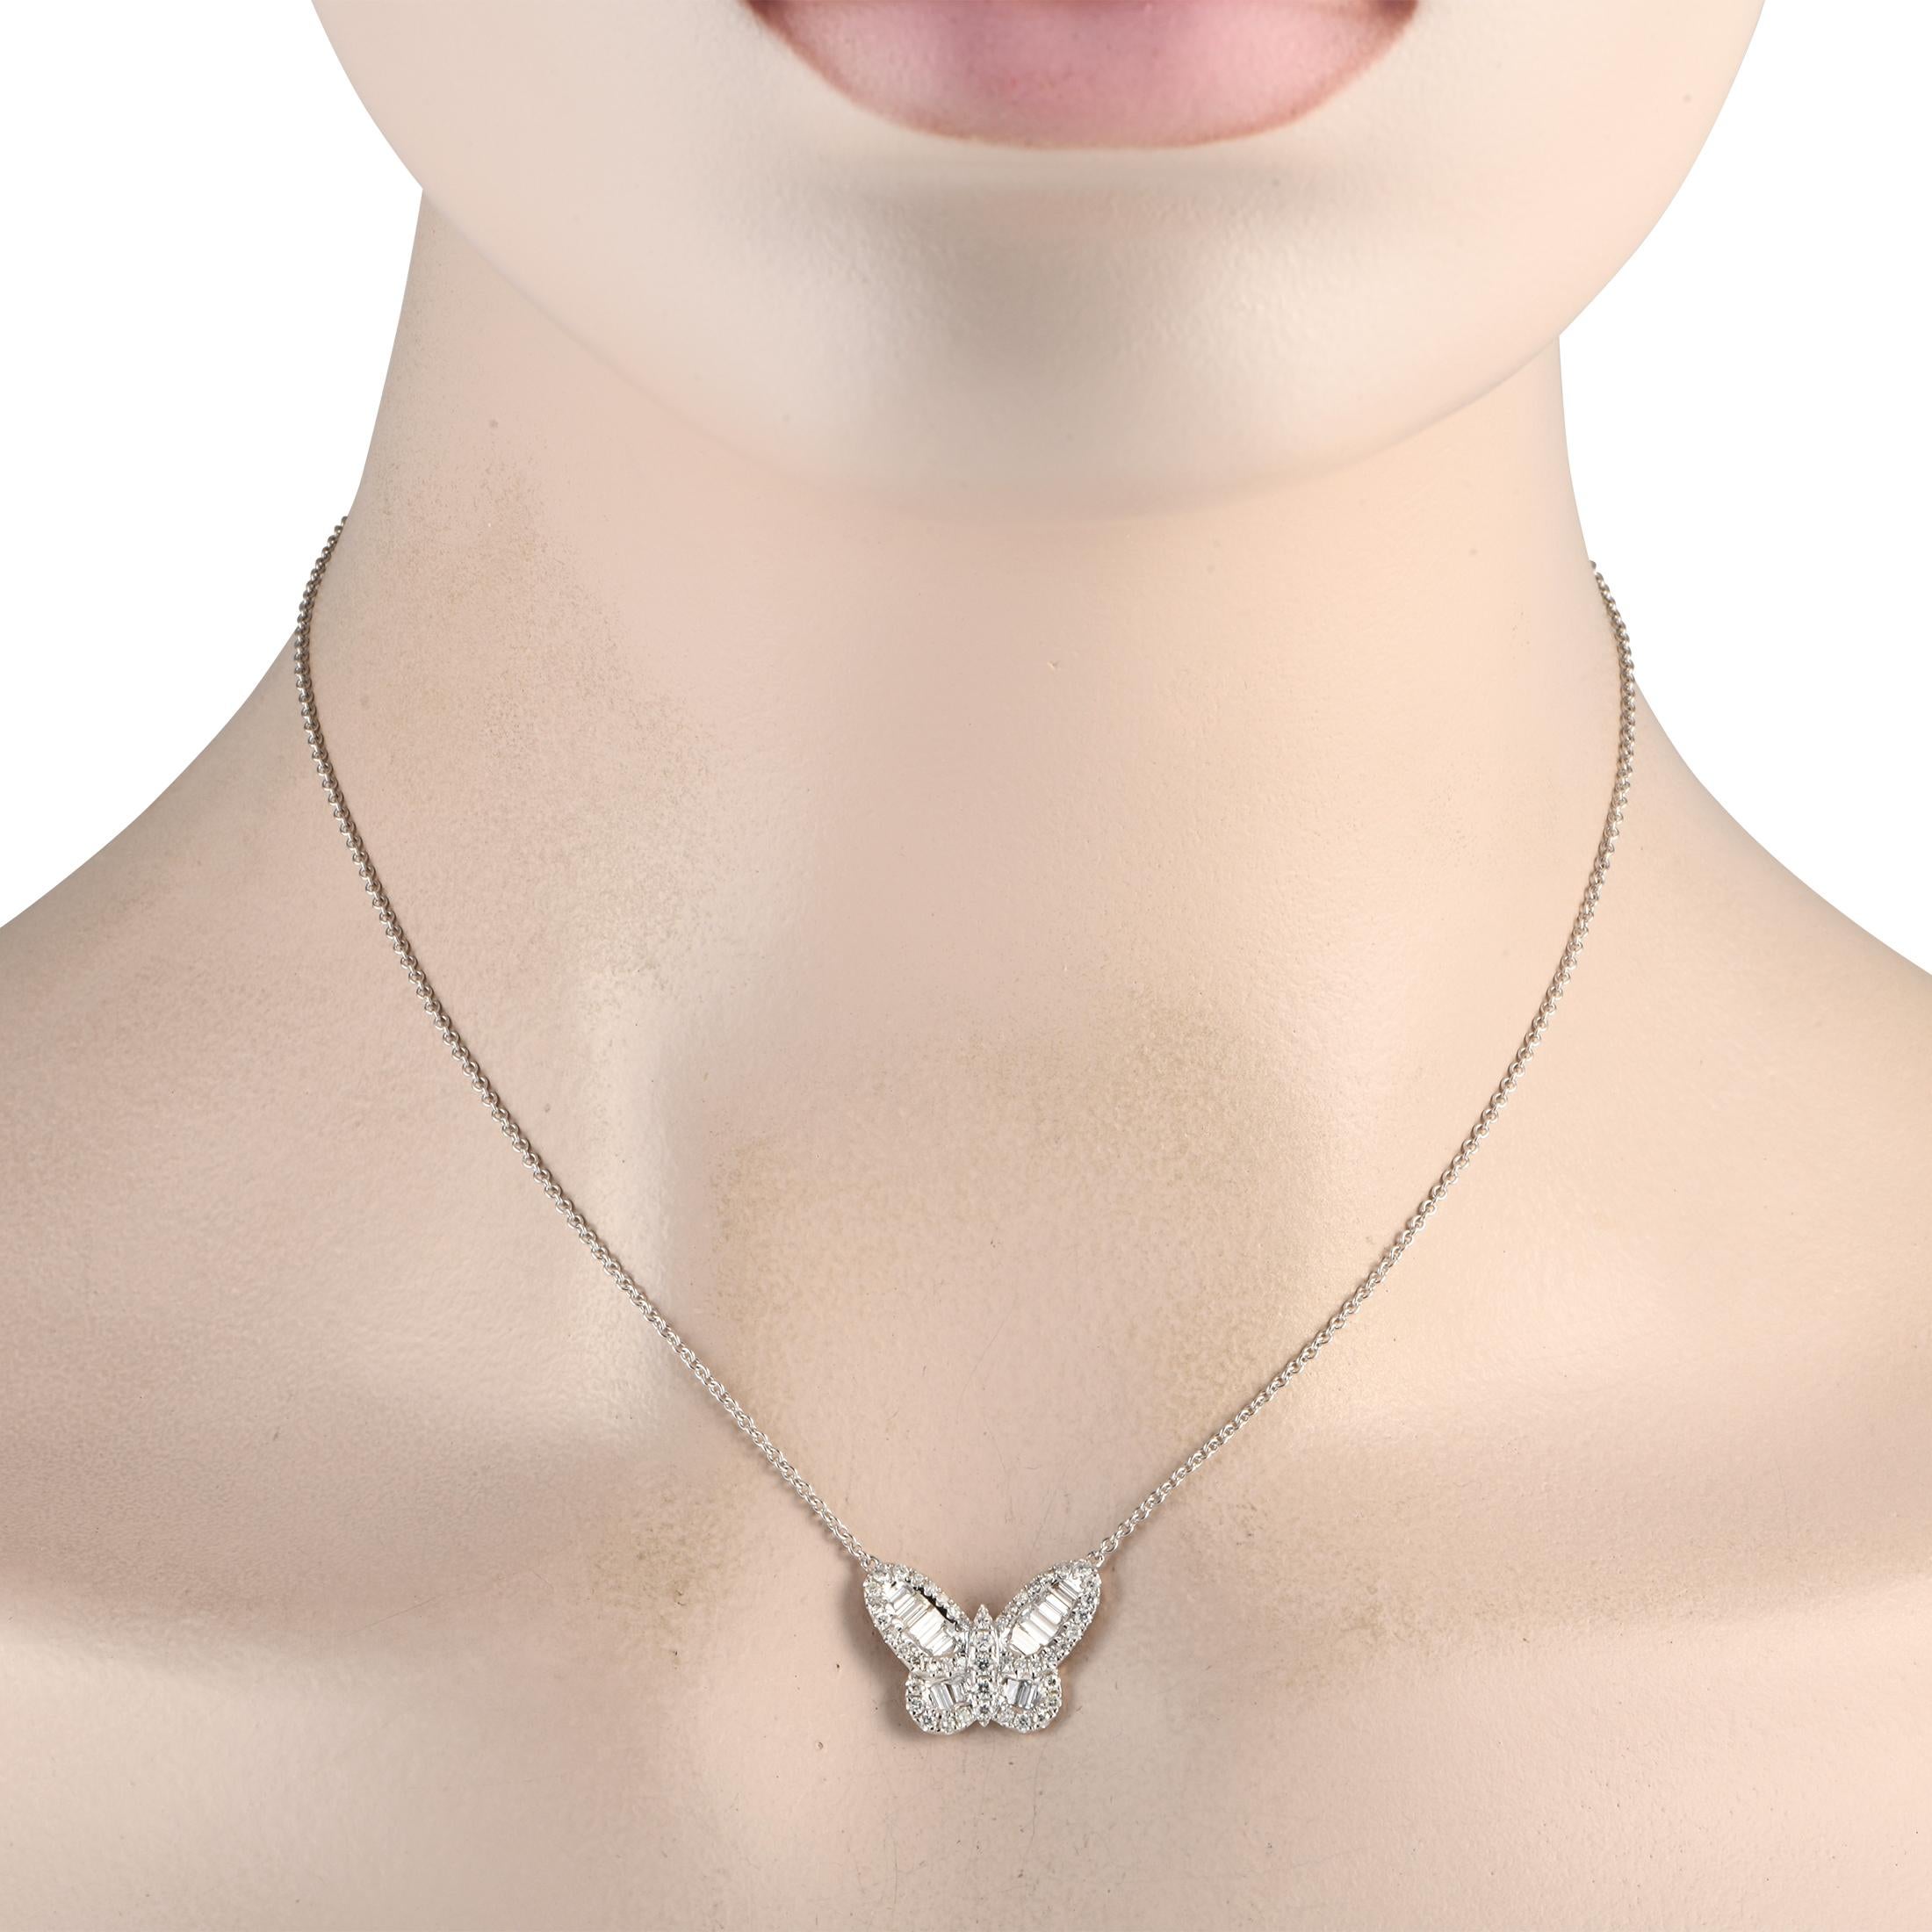 This 18K White Gold necklace is instantly captivating. Suspended at the center of a delicate 15 chain, youll find a butterfly pendant measuring 0.65 long and 0.75 wide. It comes to life thanks to a stunning combination of round-cut Diamonds totaling